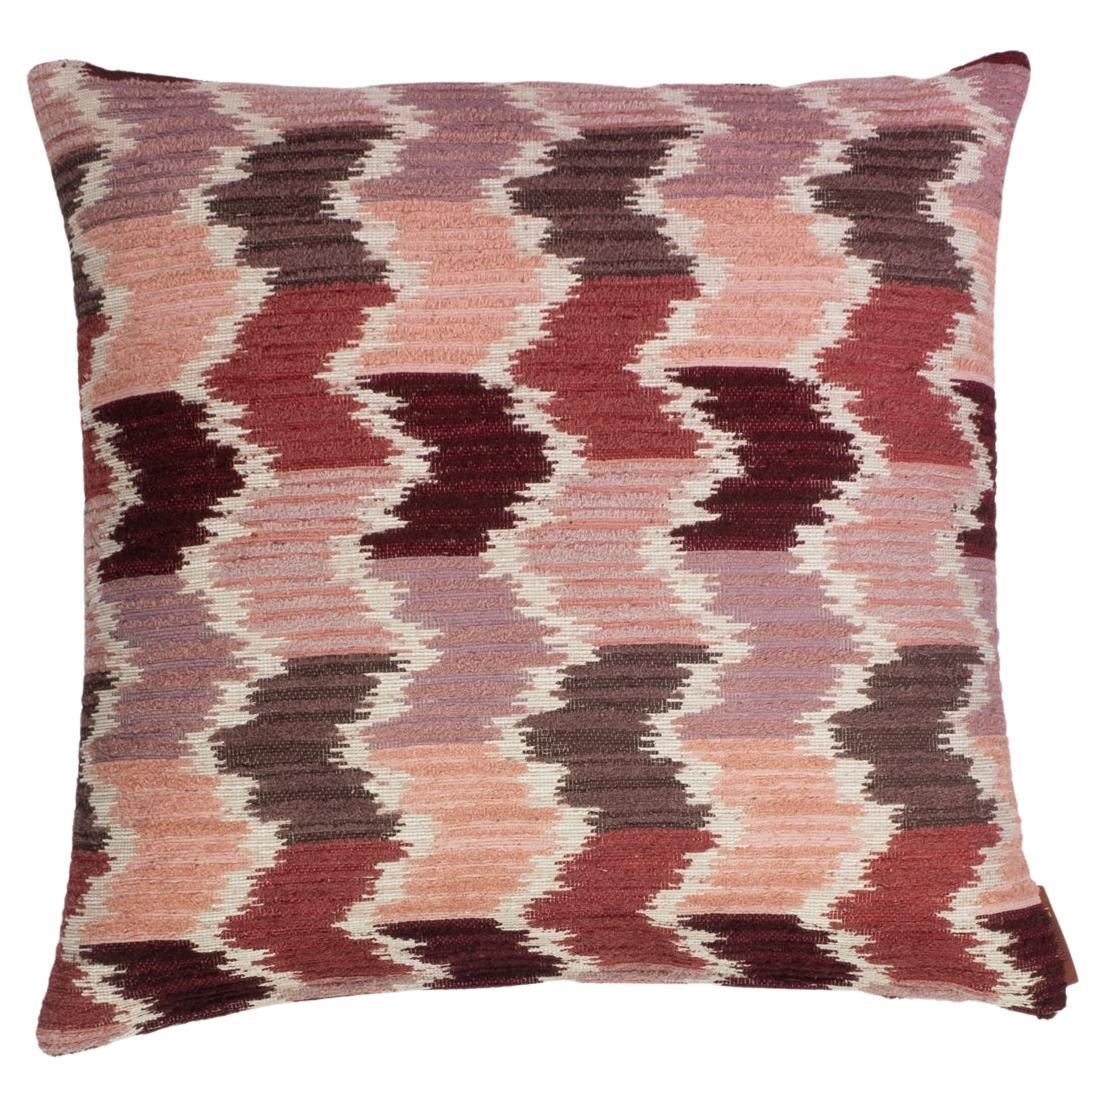 Modern Throw Patterned Pink Pillow "Micca" Rose by Evolution21 For Sale